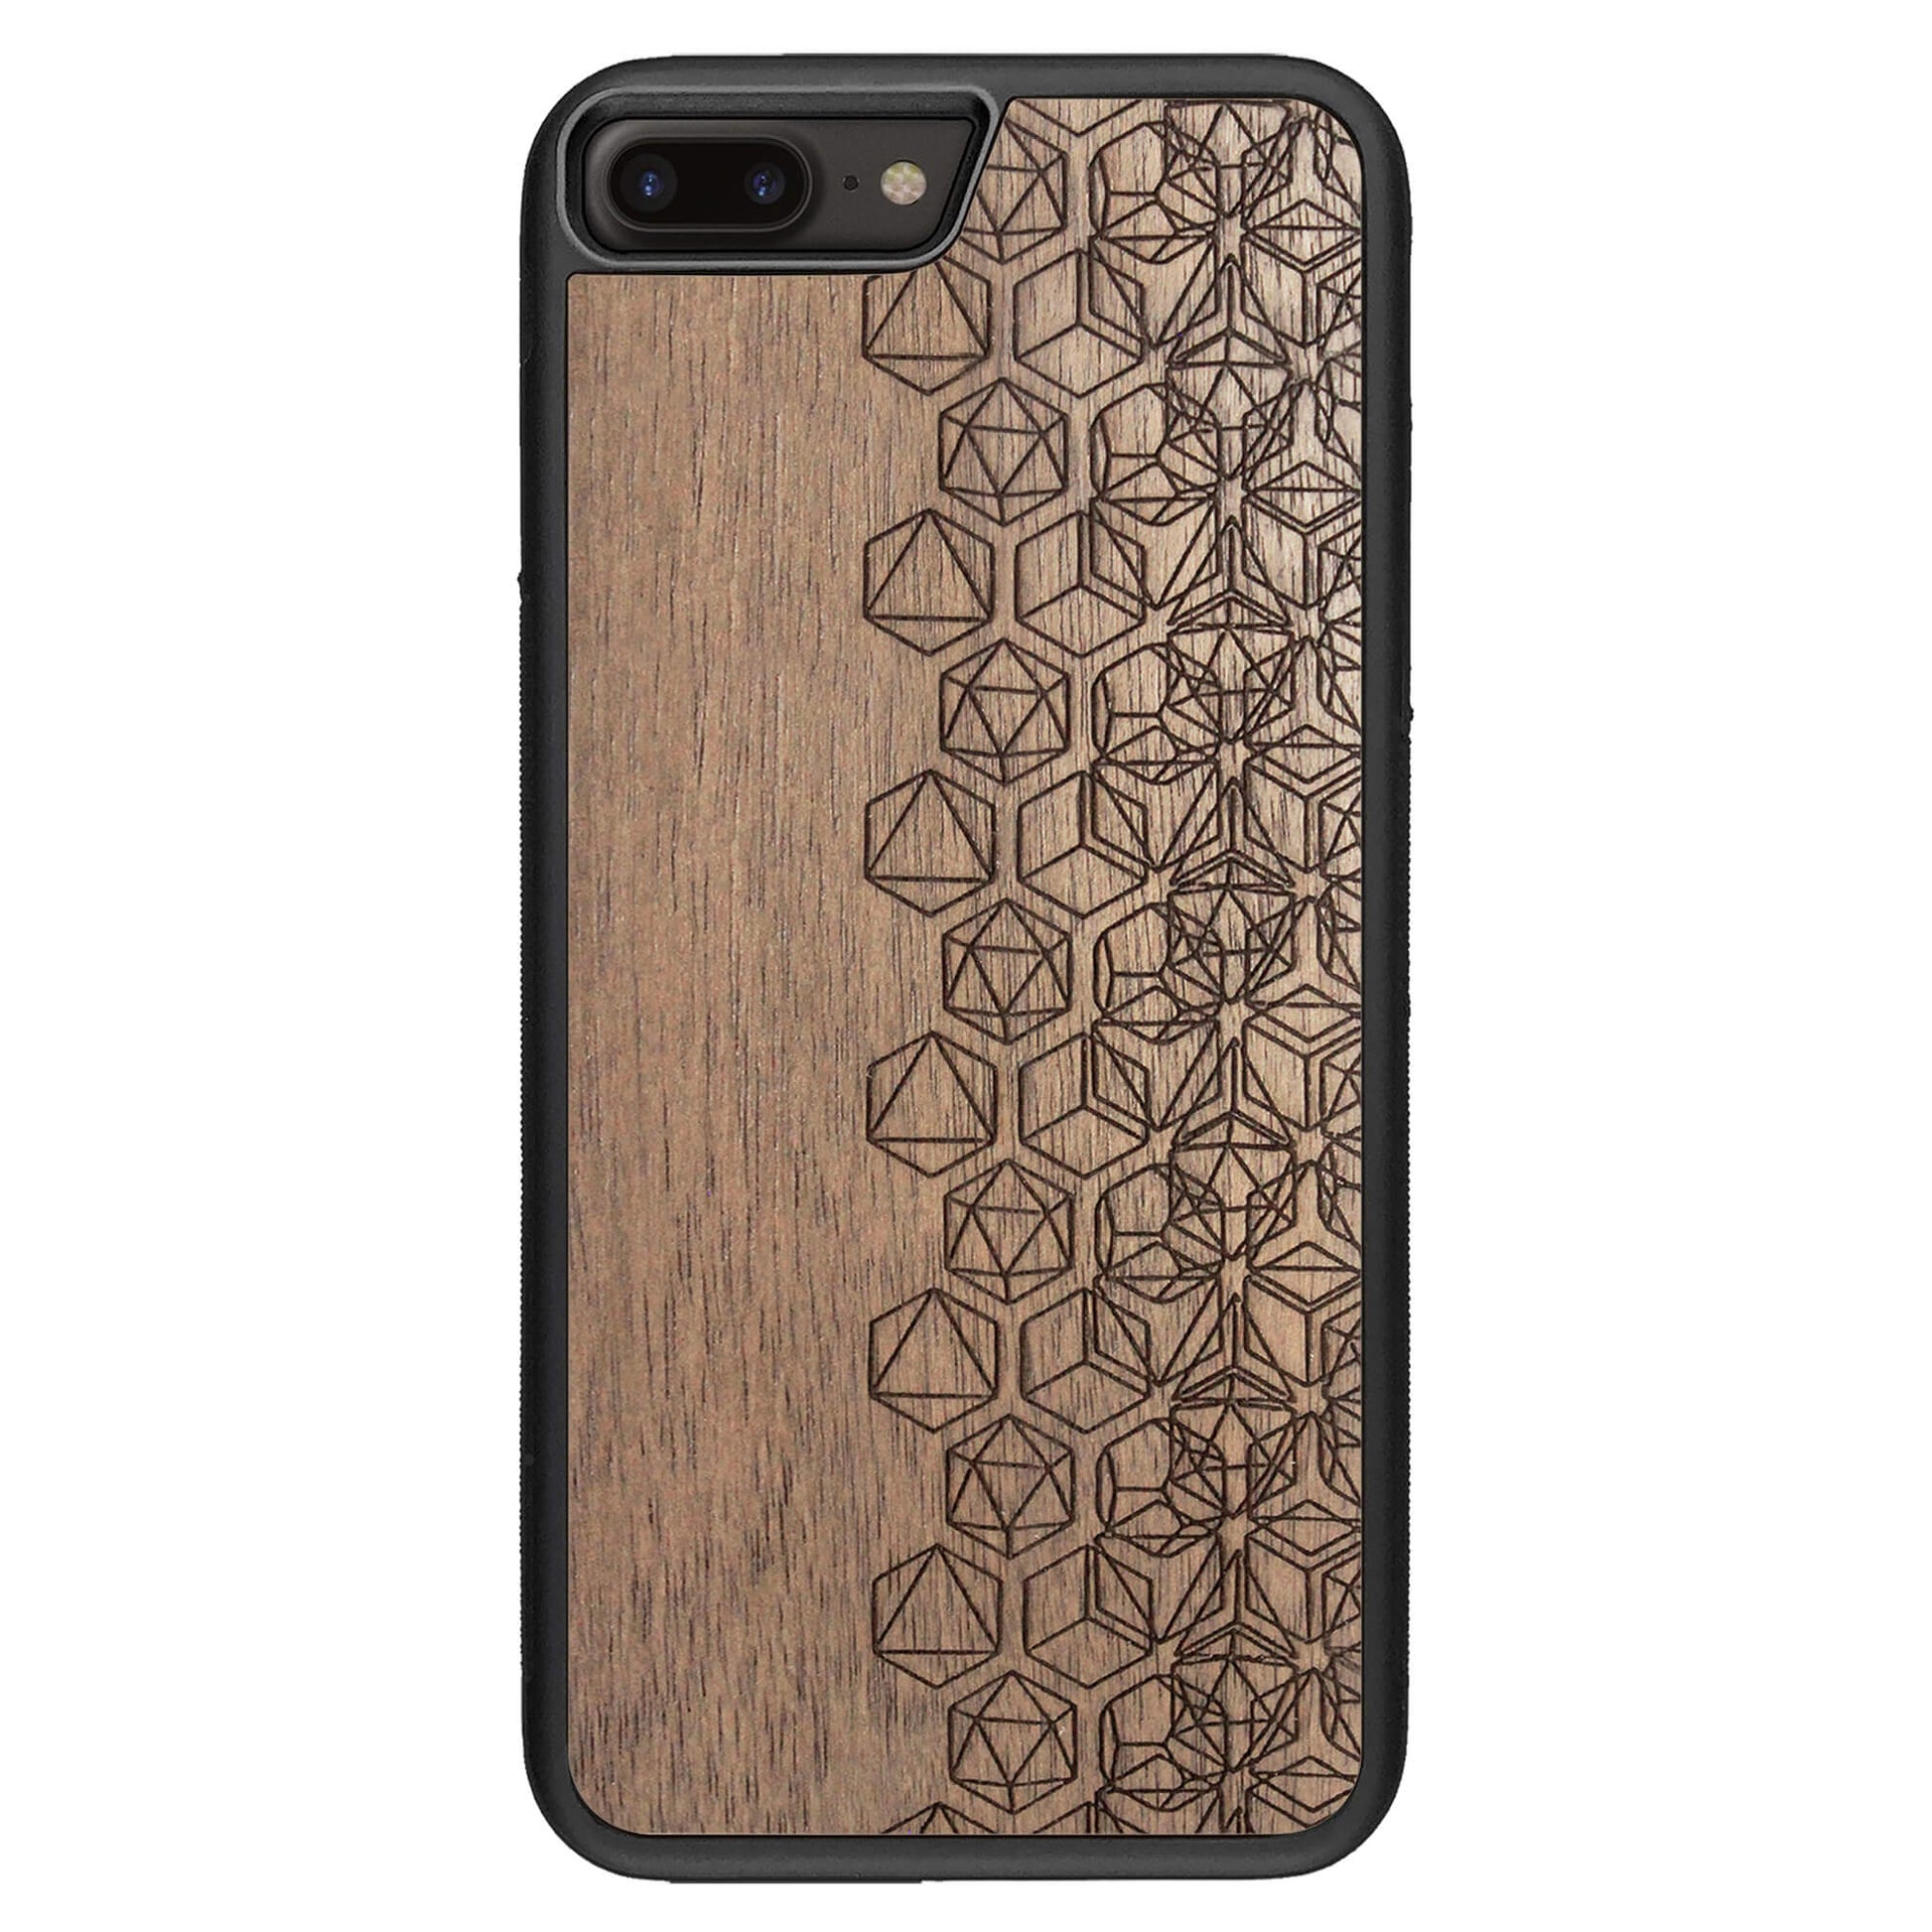 Wooden Case for iPhone 7 Plus Geometric